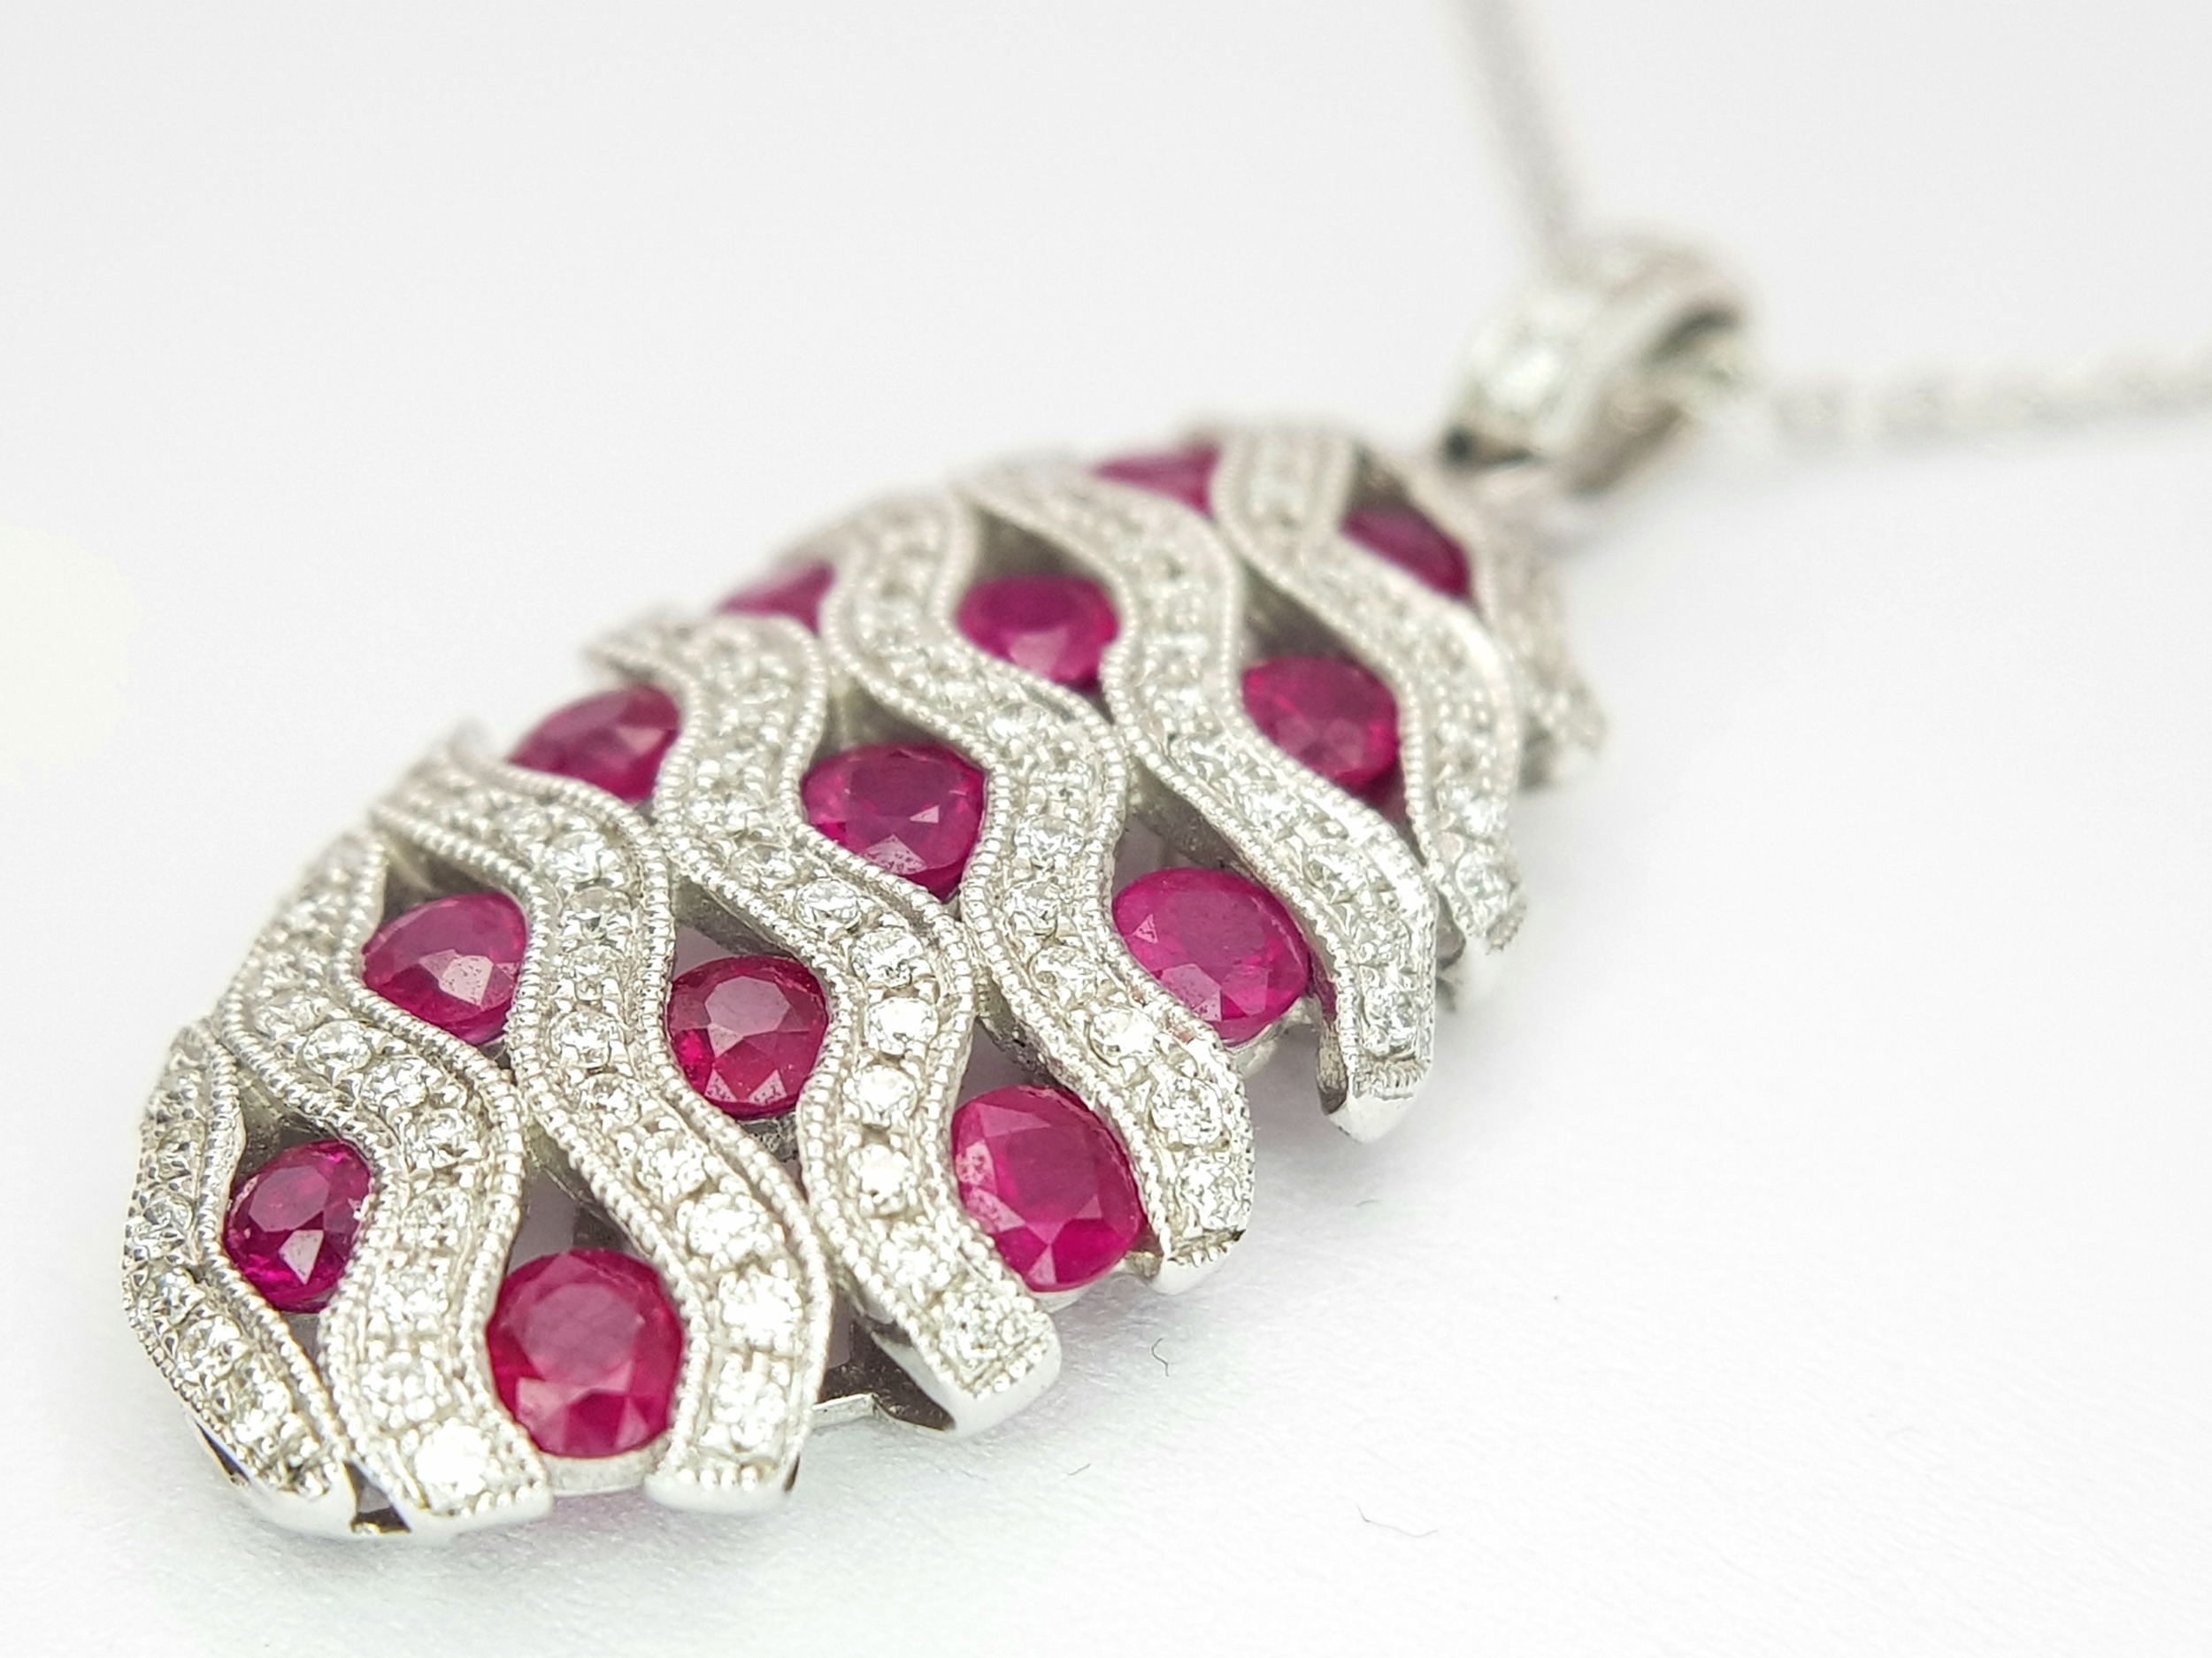 AN 18K WHITE GOLD DIAMOND AND RUBY PENDANT - 0.49CT OF DIAMONDS AND 2.29CT OF RUBIES. 6.2G WEIGHT. - Image 3 of 16